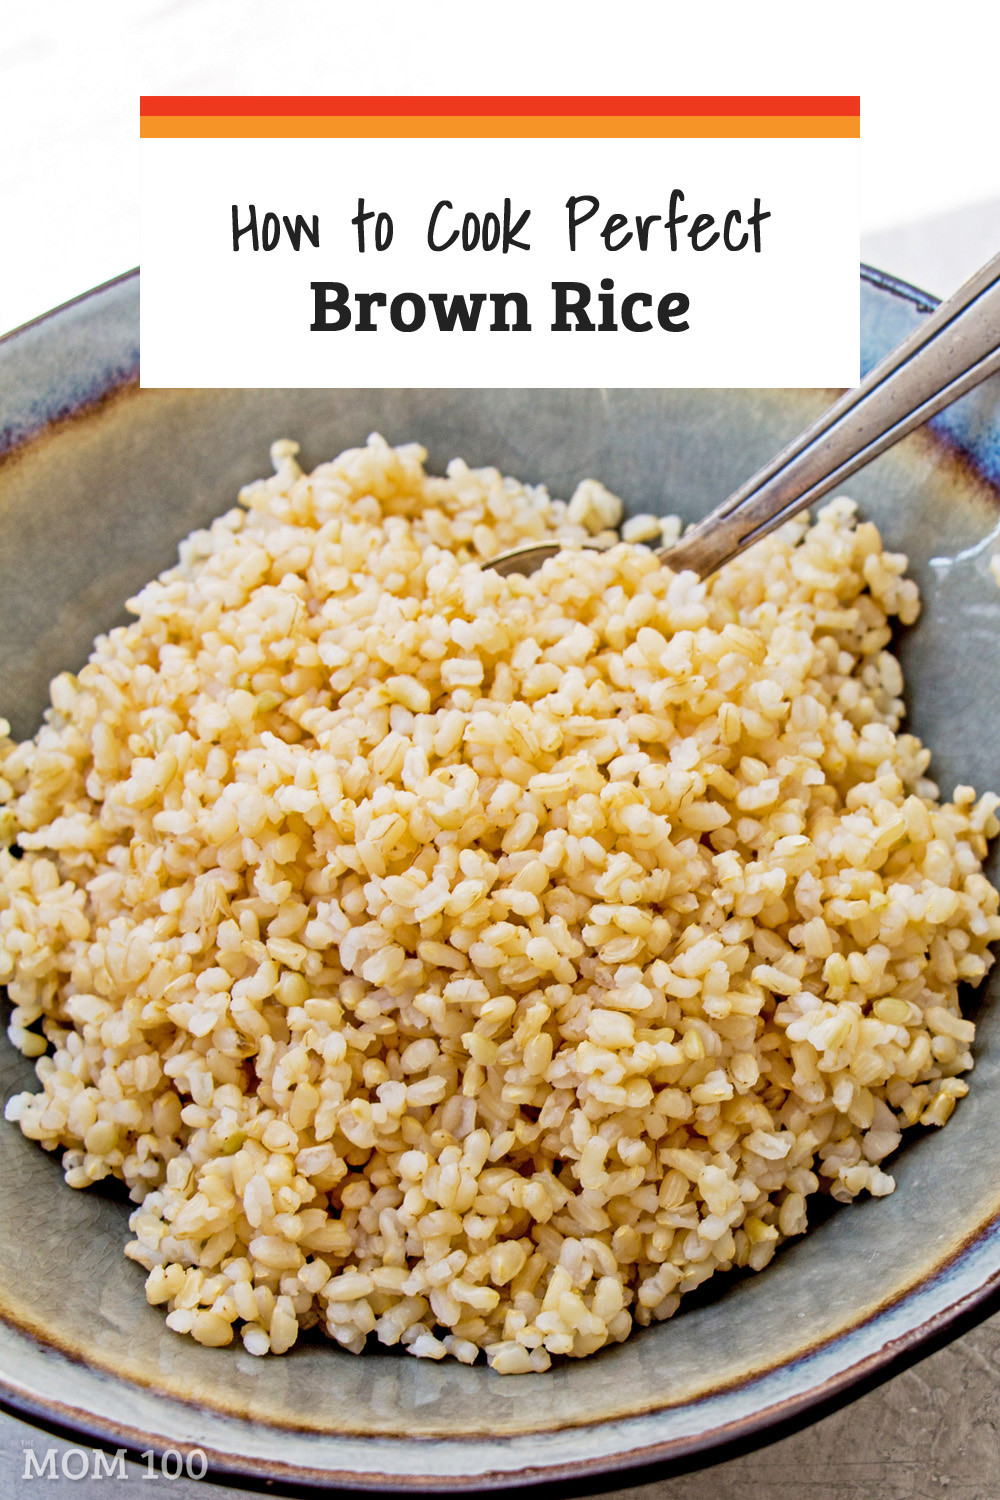 Cook Brown Rice In Microwave
 How to Cook Perfect Brown Rice on the Stove — The Mom 100